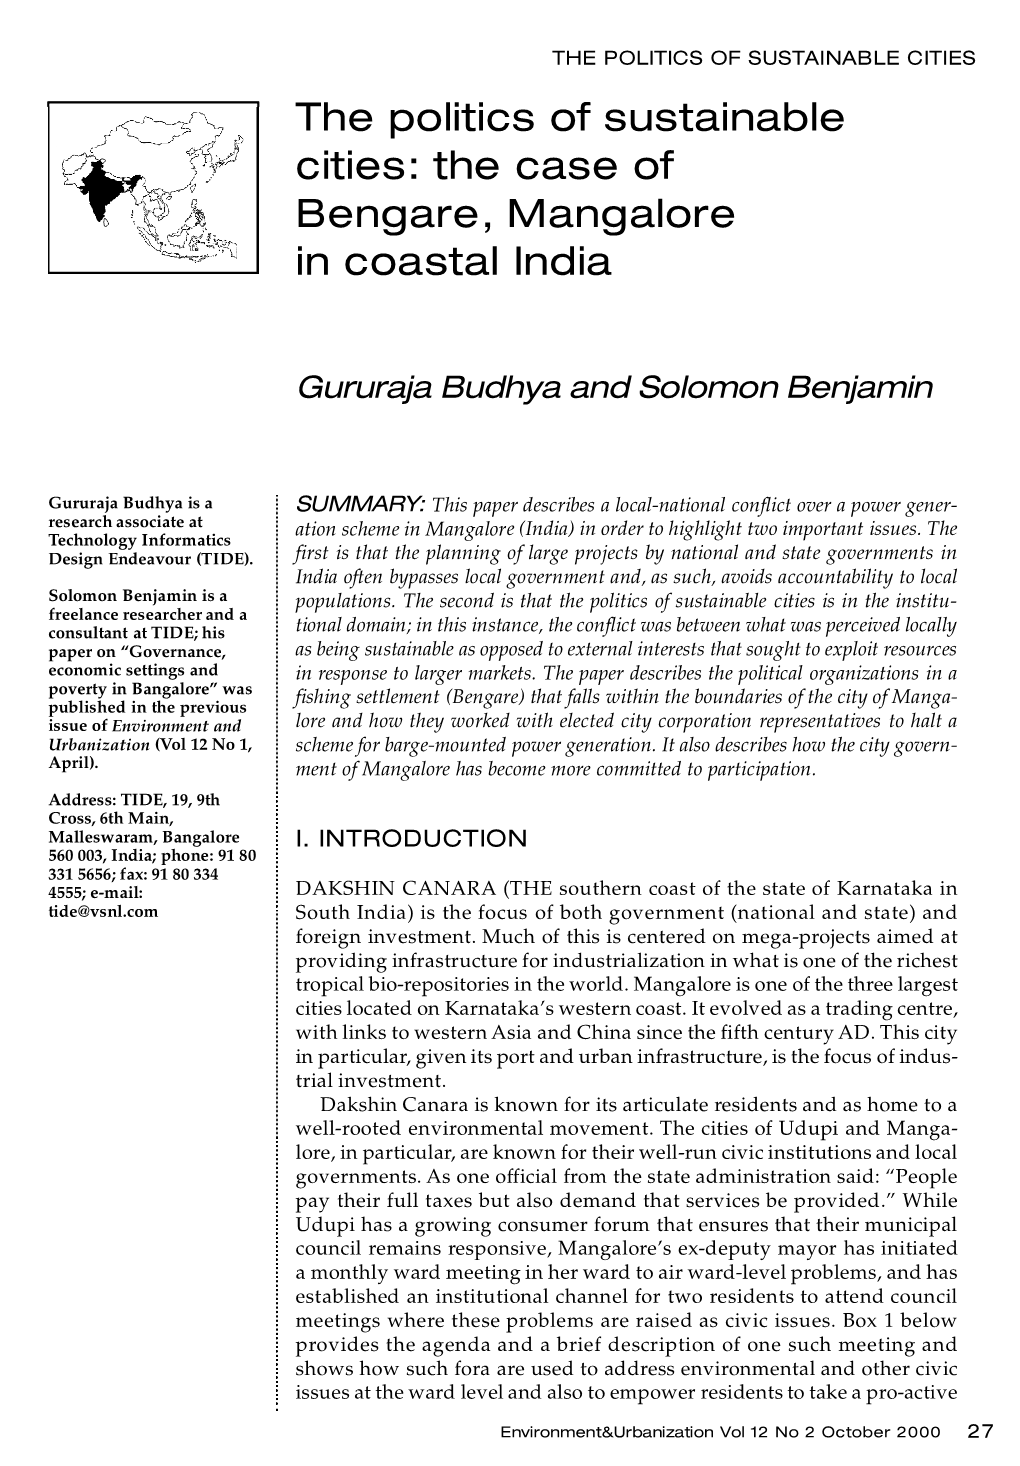 The Politics of Sustainable Cities: the Case of Bengare, Mangalore in Coastal India